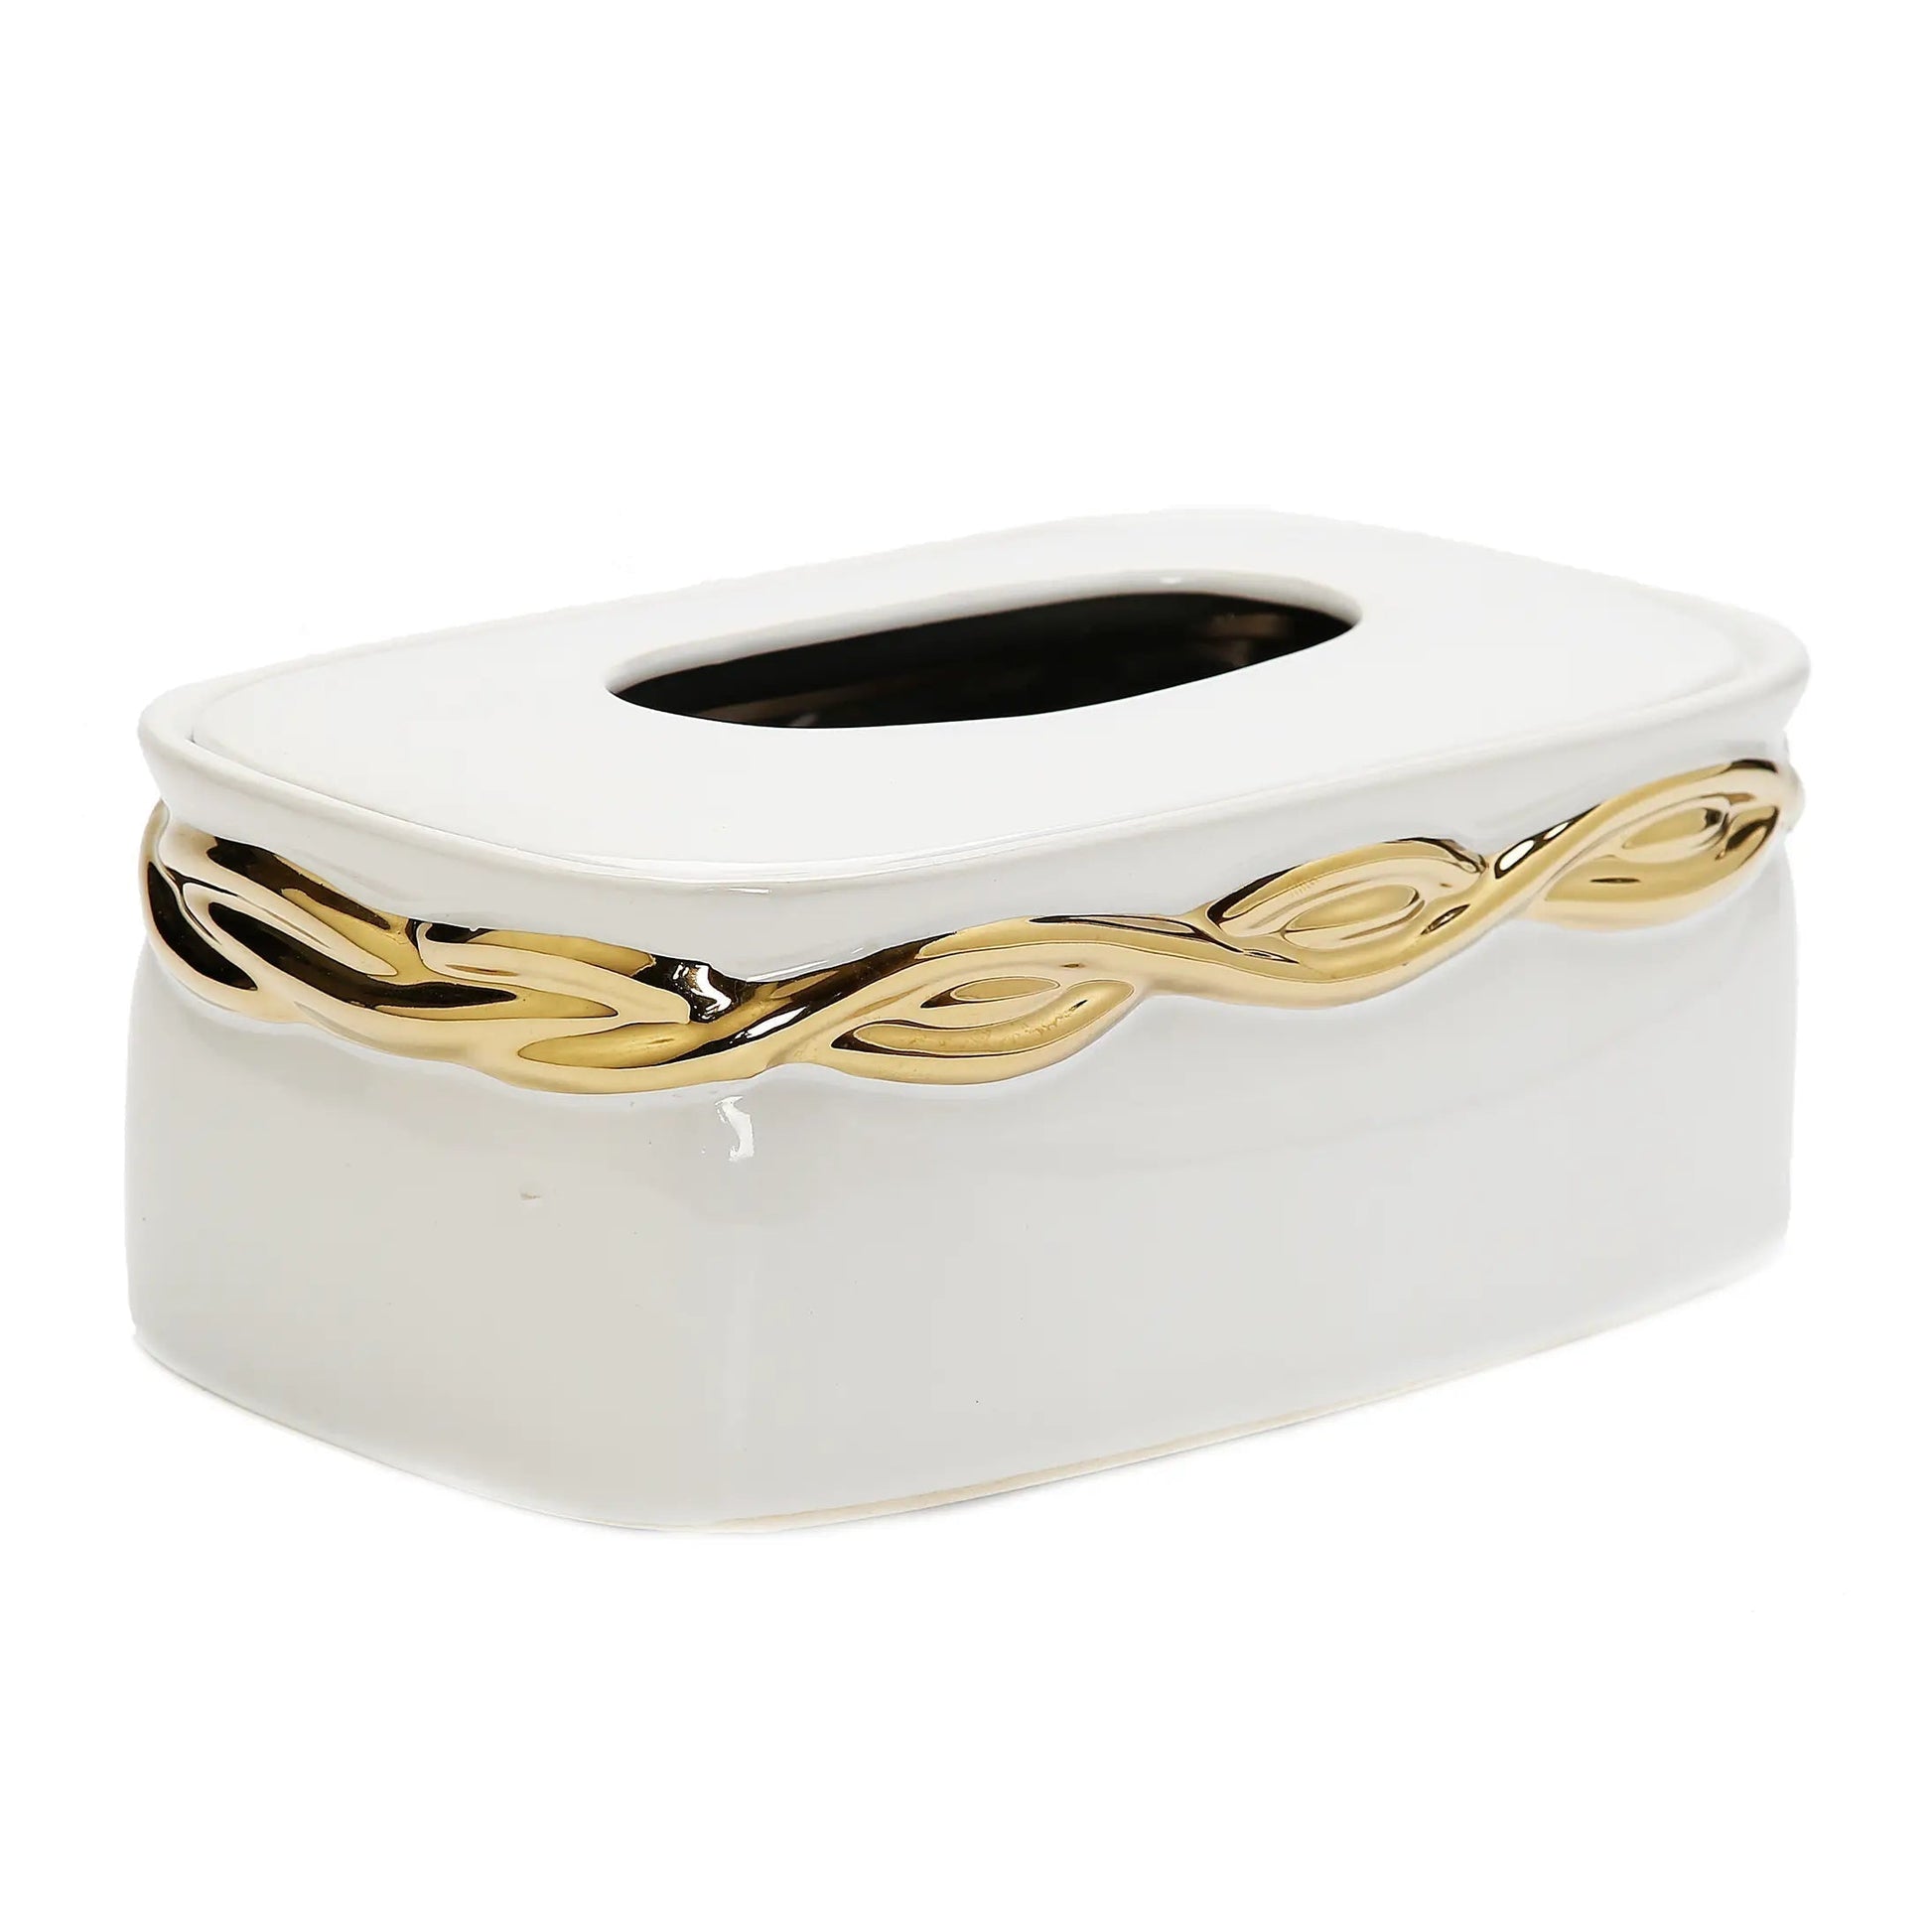 White Tissue Box Gold Rounded Design Facial Tissue Holders High Class Touch - Home Decor 